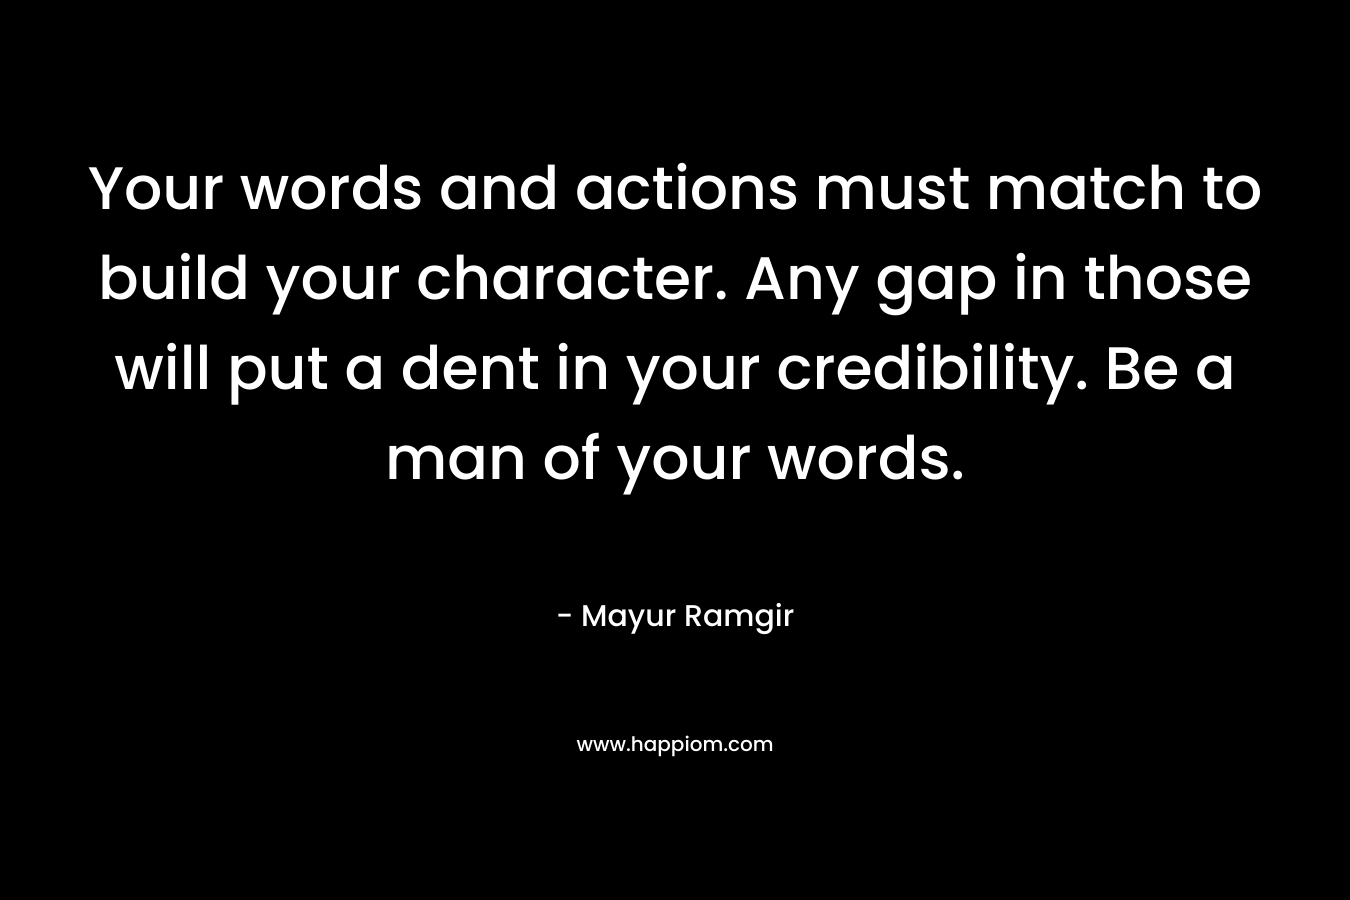 Your words and actions must match to build your character. Any gap in those will put a dent in your credibility. Be a man of your words.